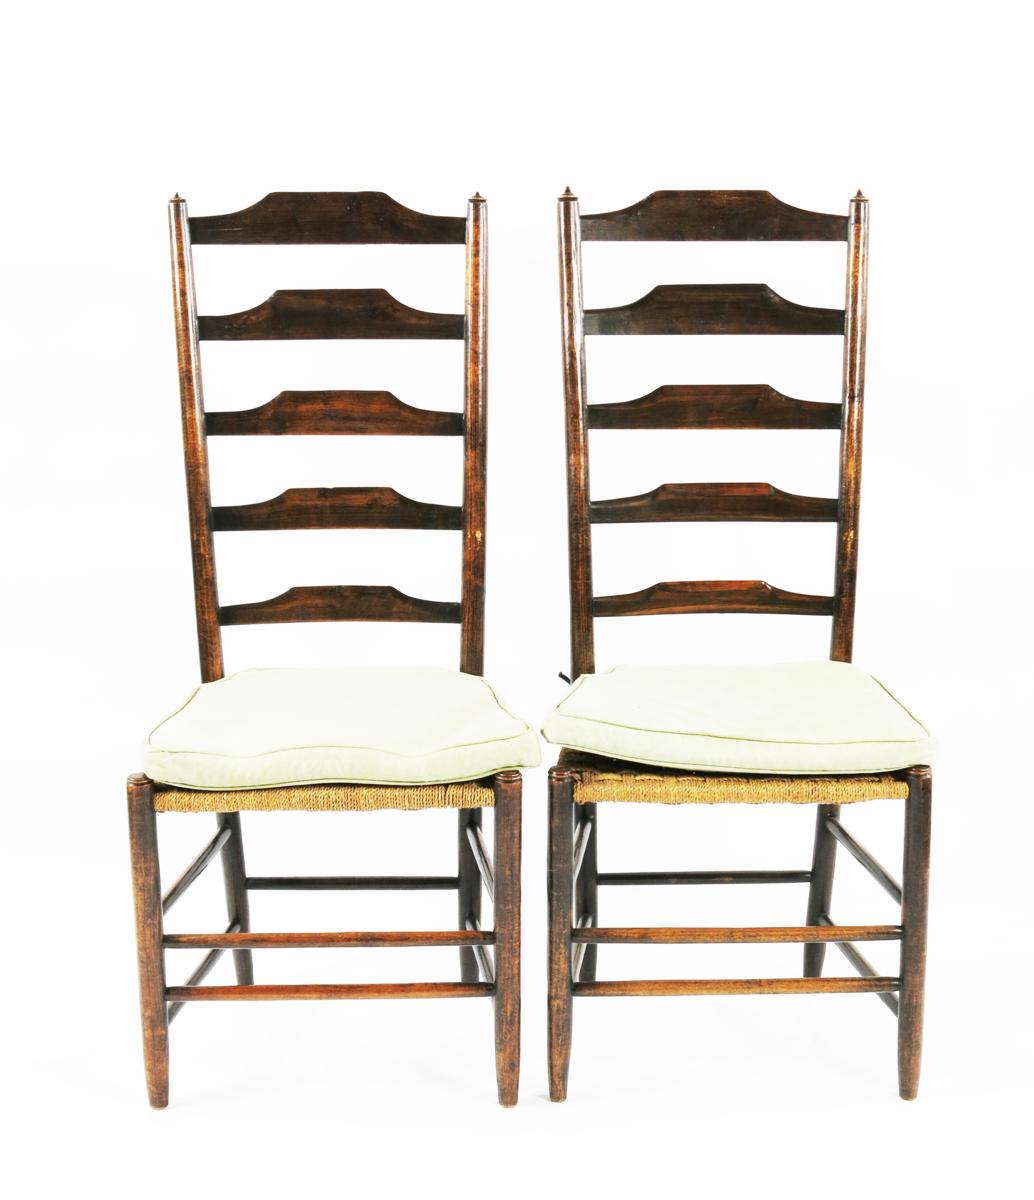 A set of six Clissett High Back ladder-back chairs designed by Ernest Gimson, with strung seats, - Image 3 of 3